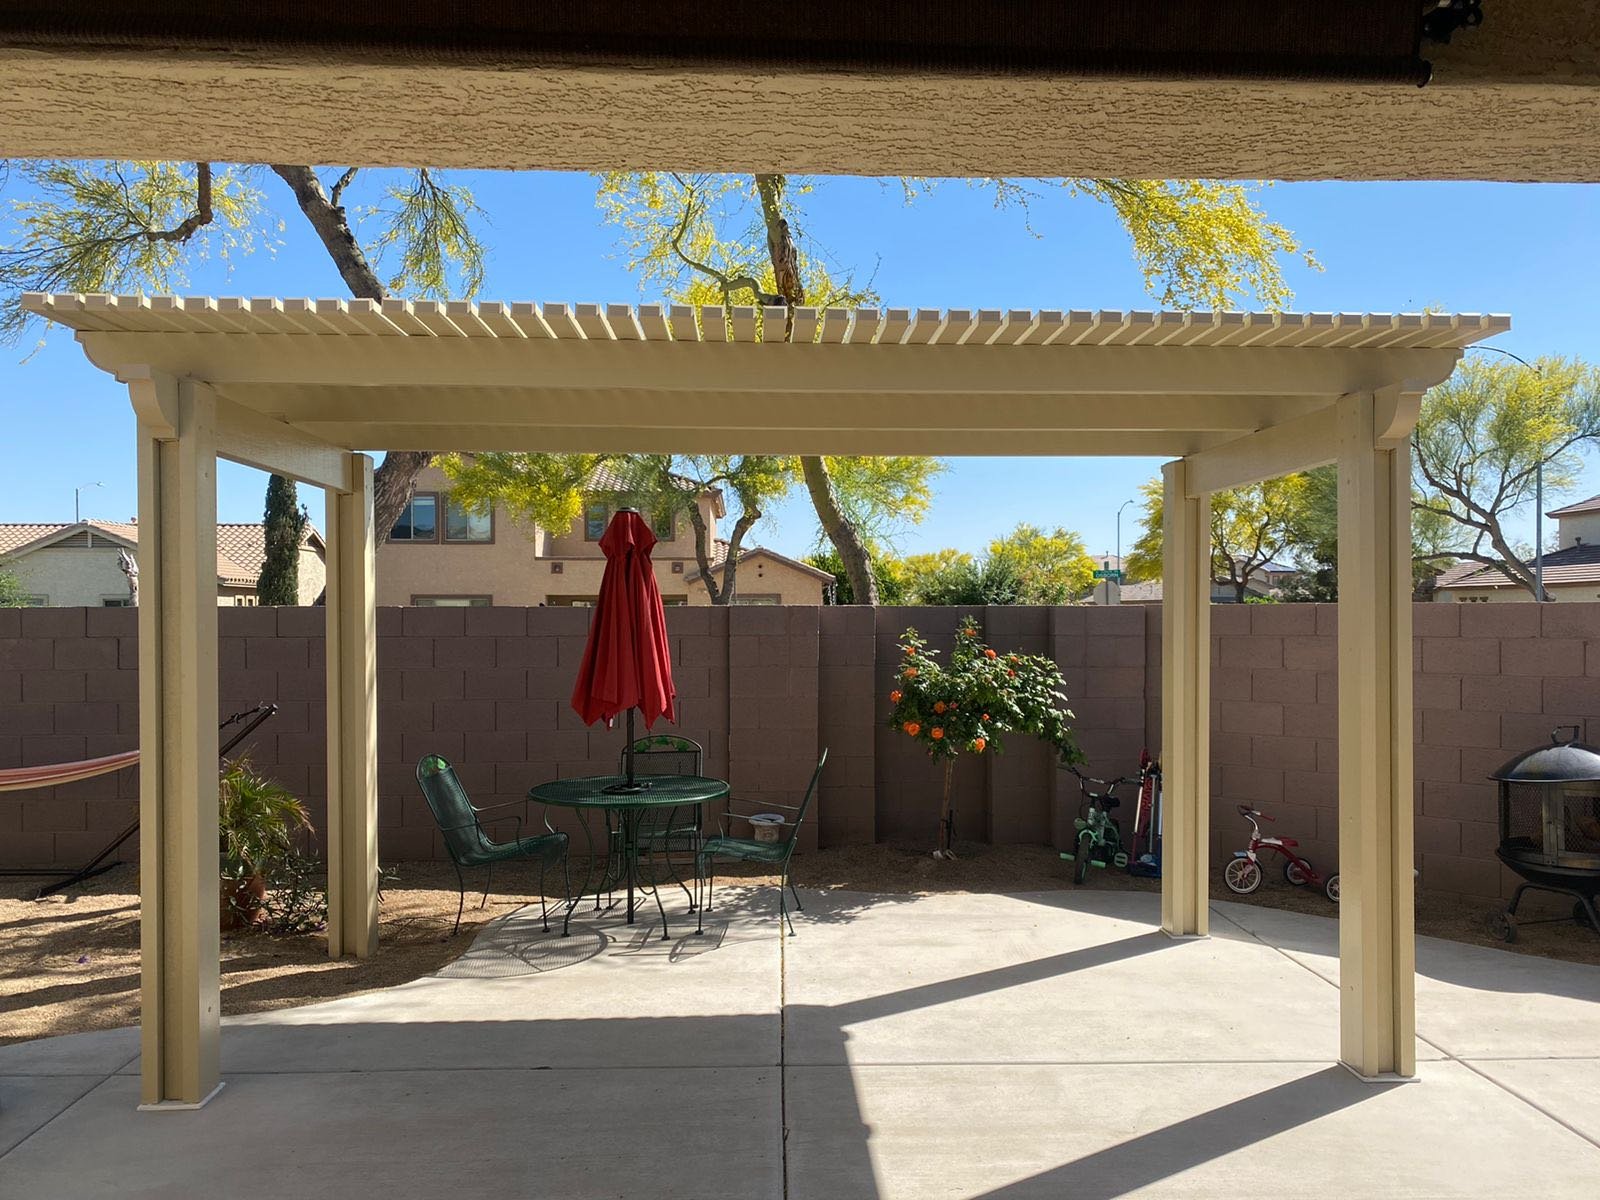 Lattice Patio Cover Installation Services by Outshine Patio Cover, Goodyear AZ